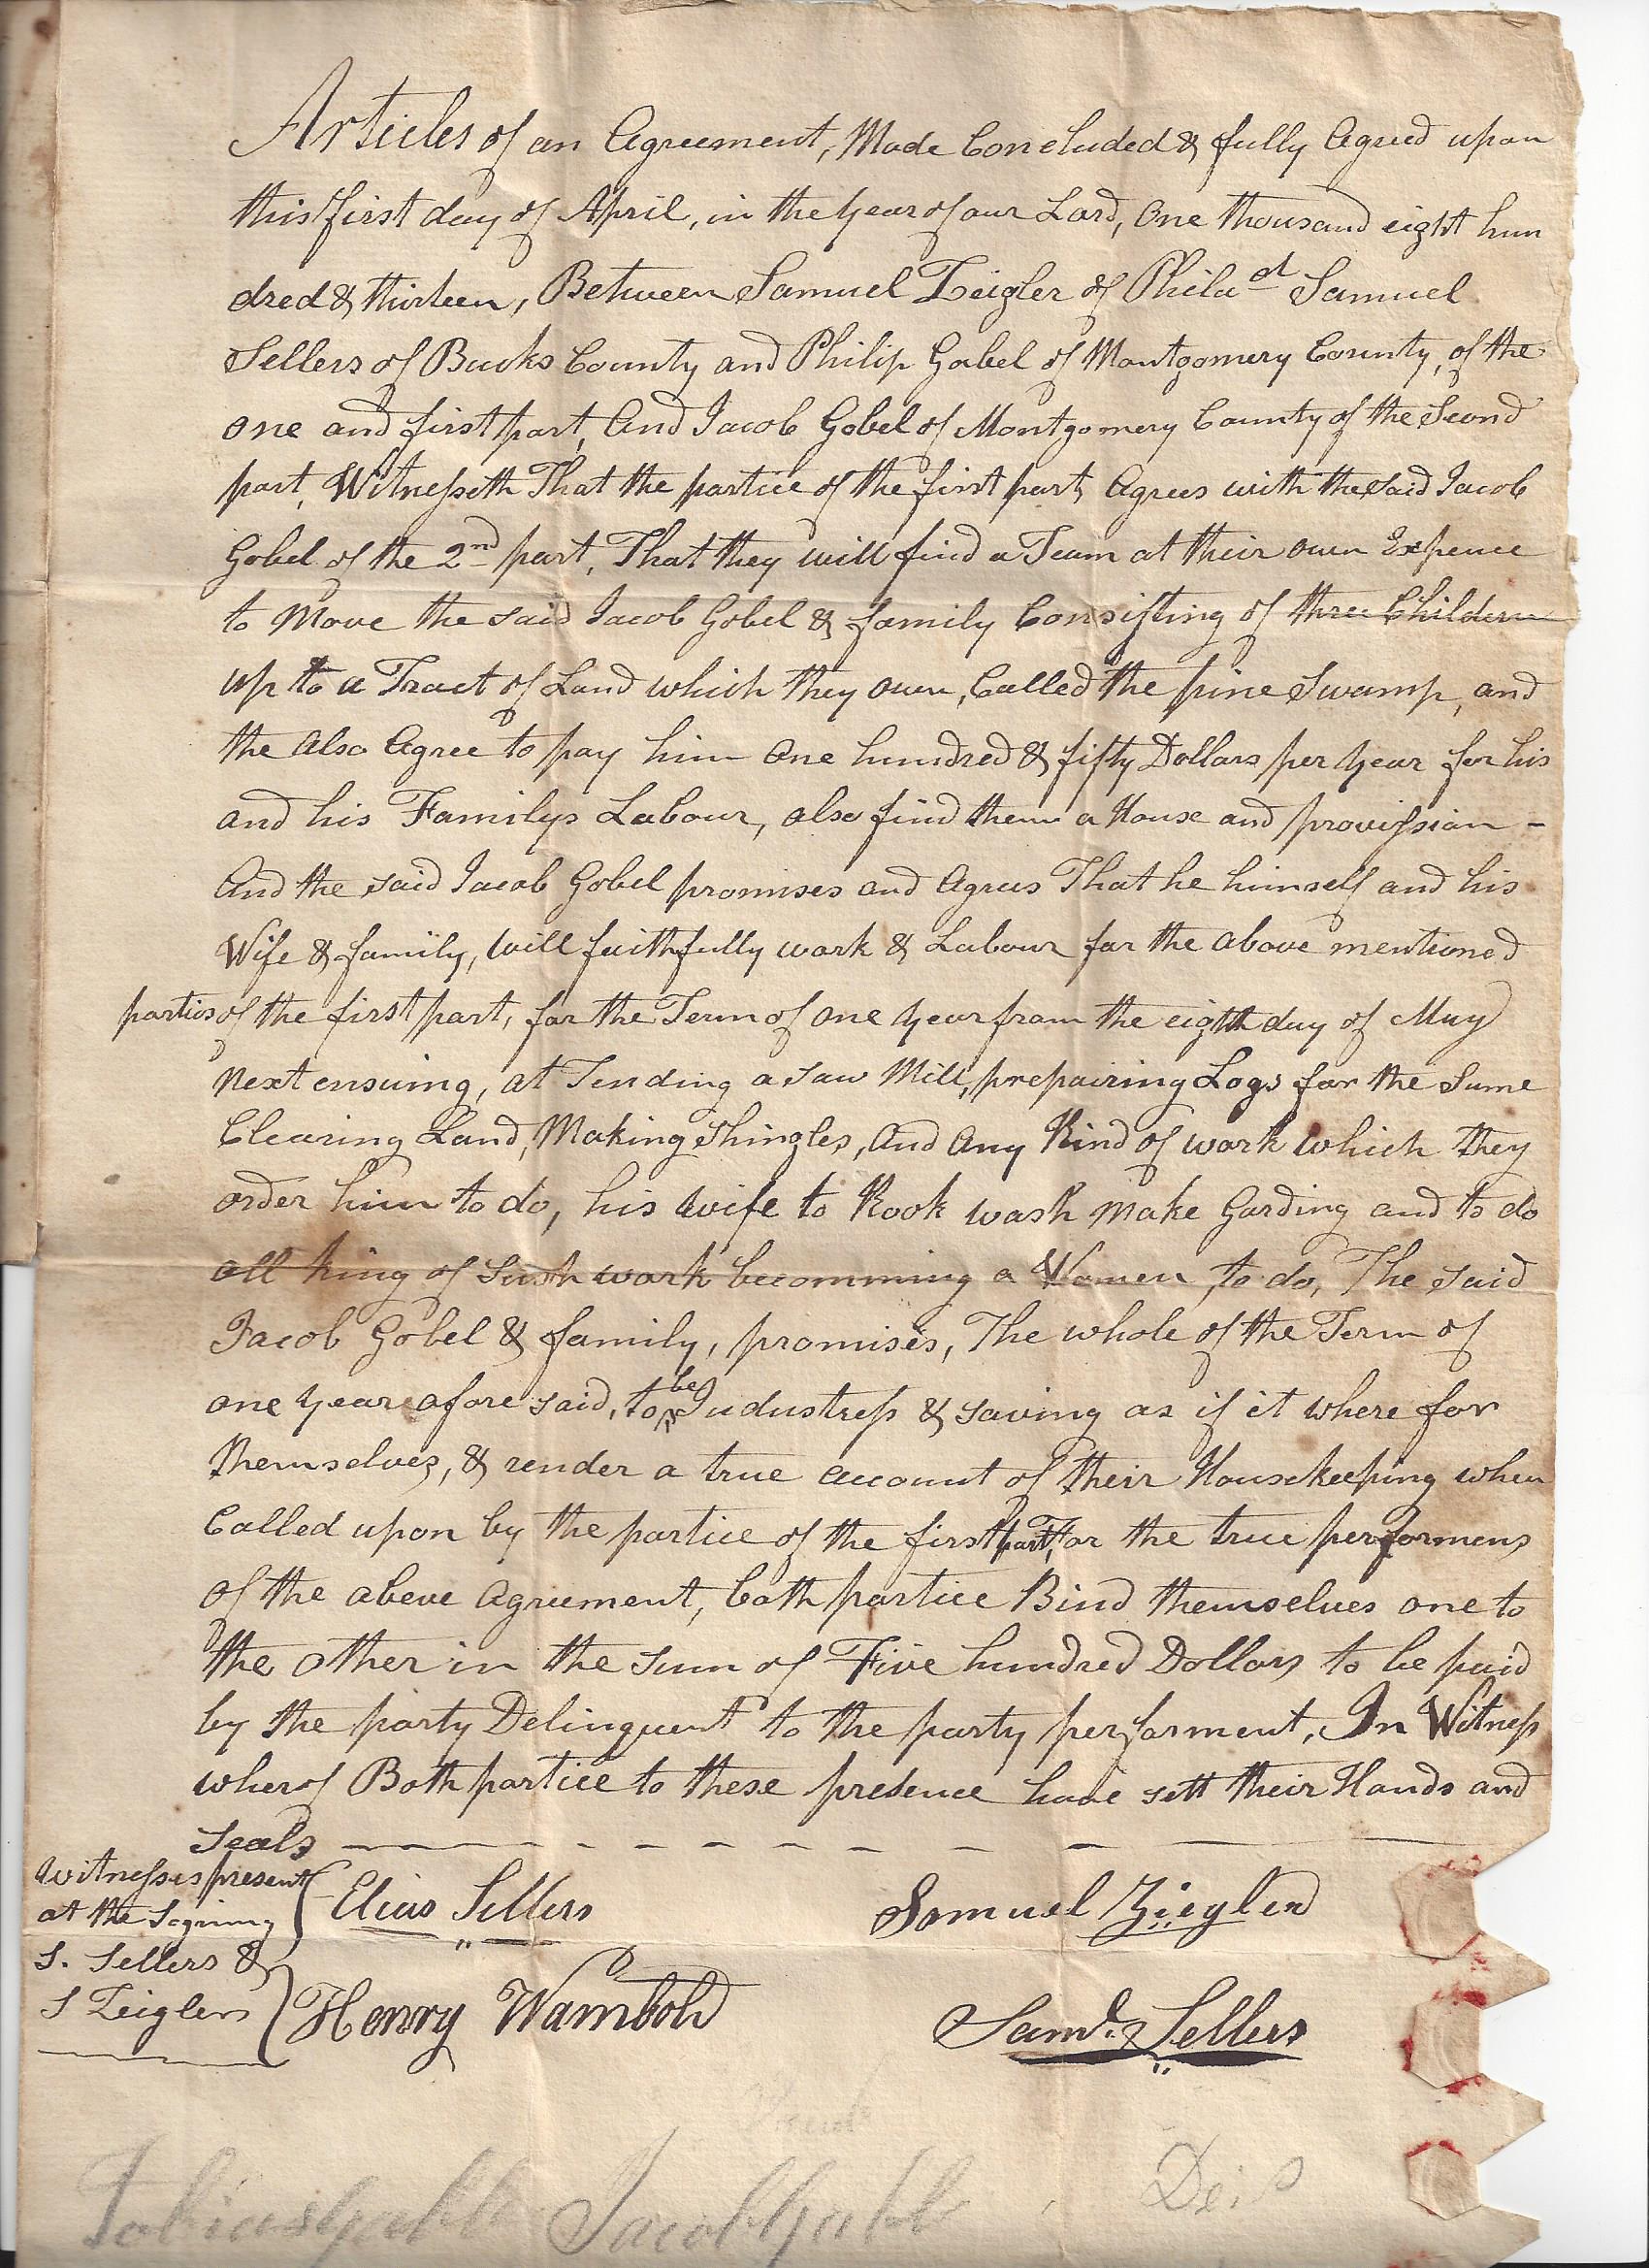 1813 Article of AGreement